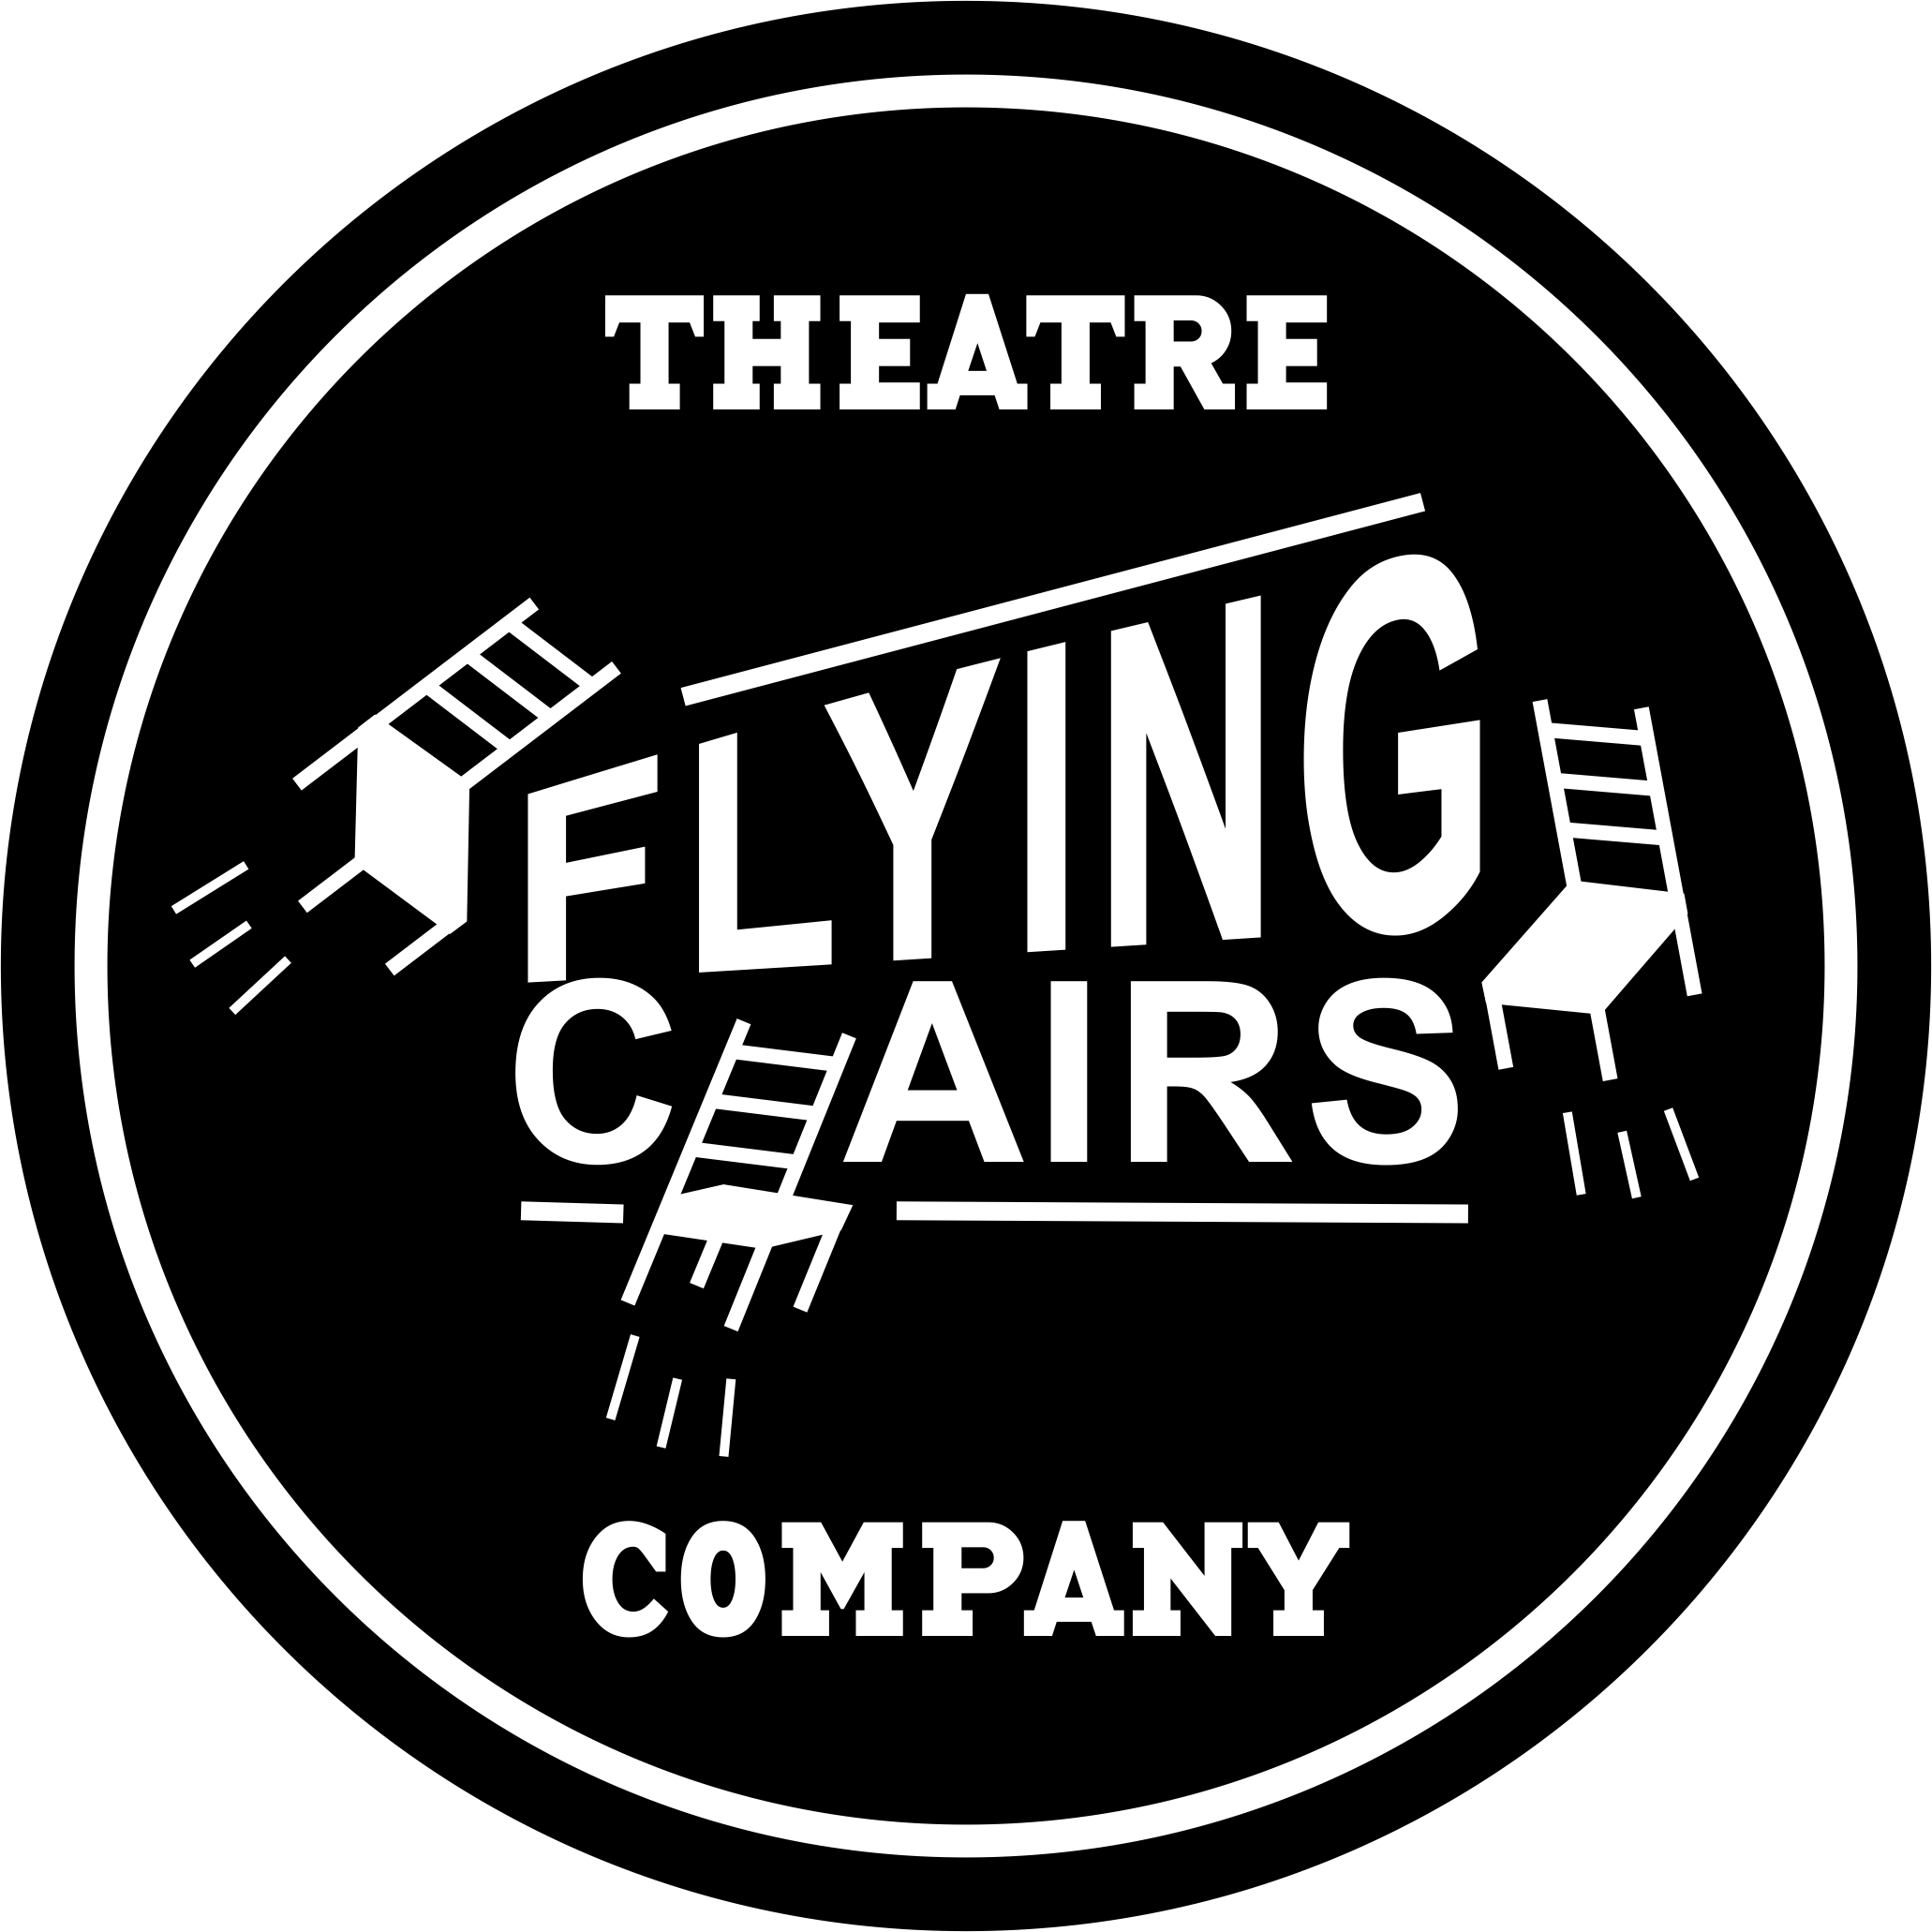 Design Process Of: The Flying Chairs Theatre Company Logo